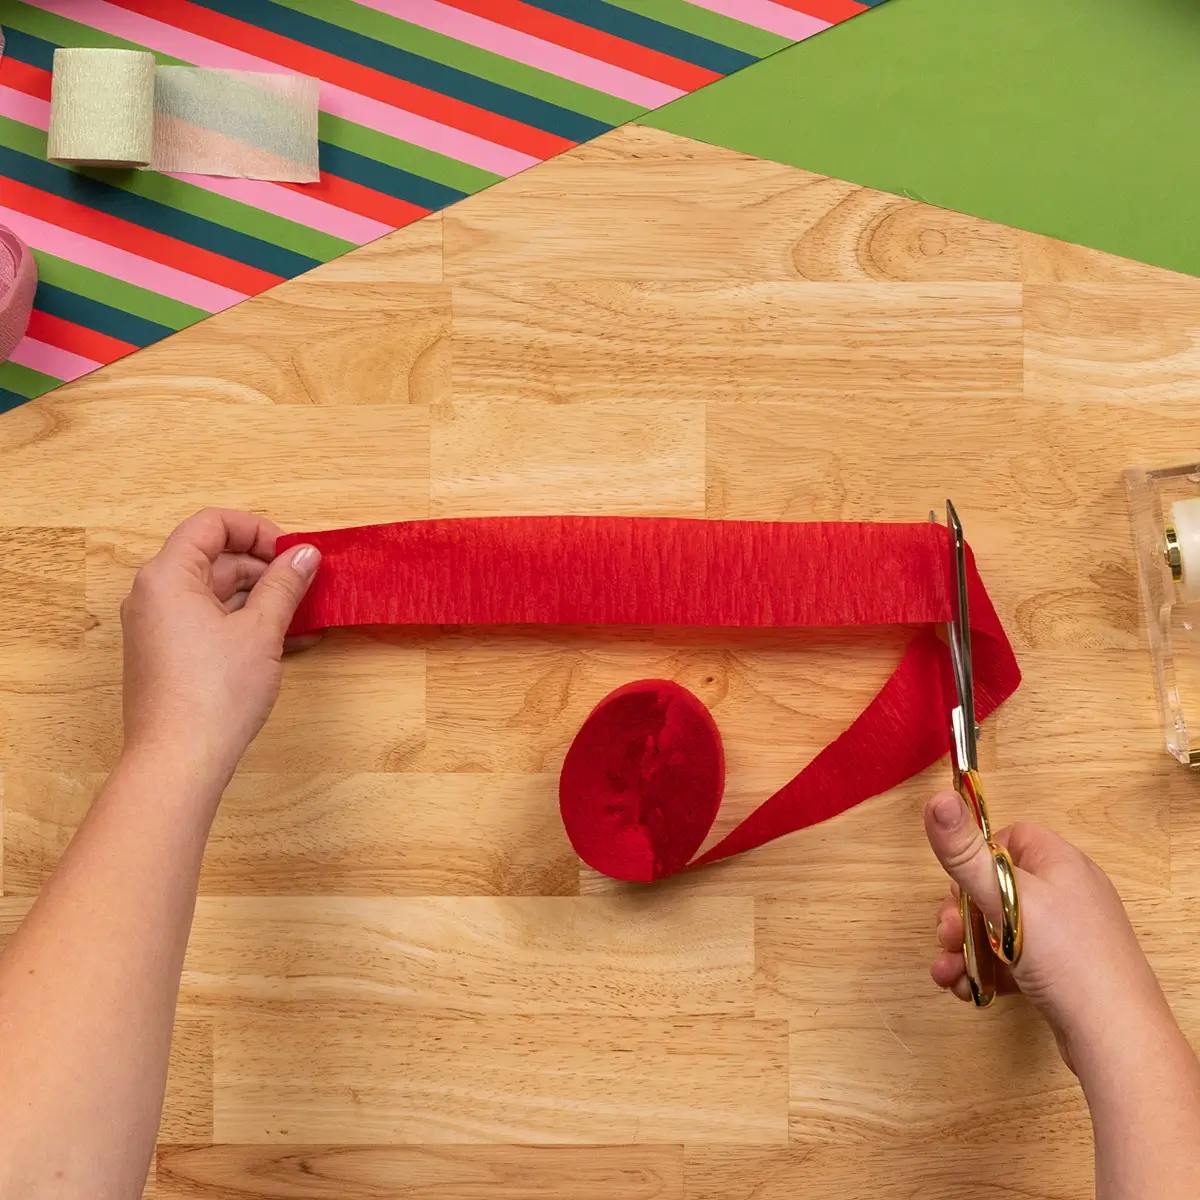 Cutting strips of crepe paper ready to wrap a mug as a gift.